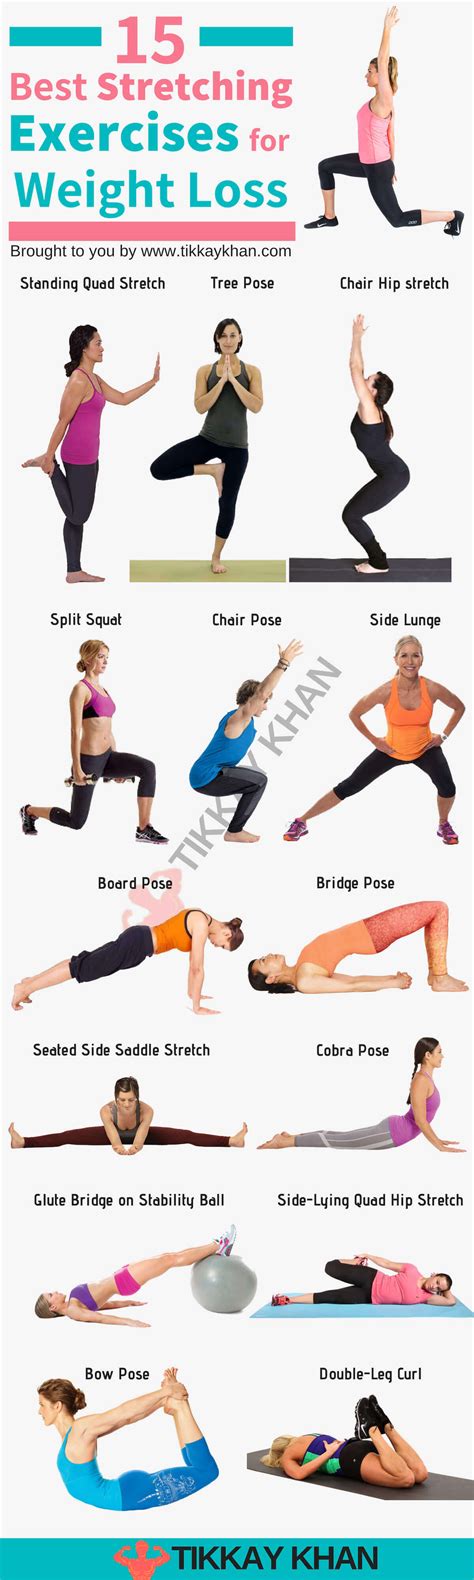 15 Best Stretching Exercises For Weight Loss Health